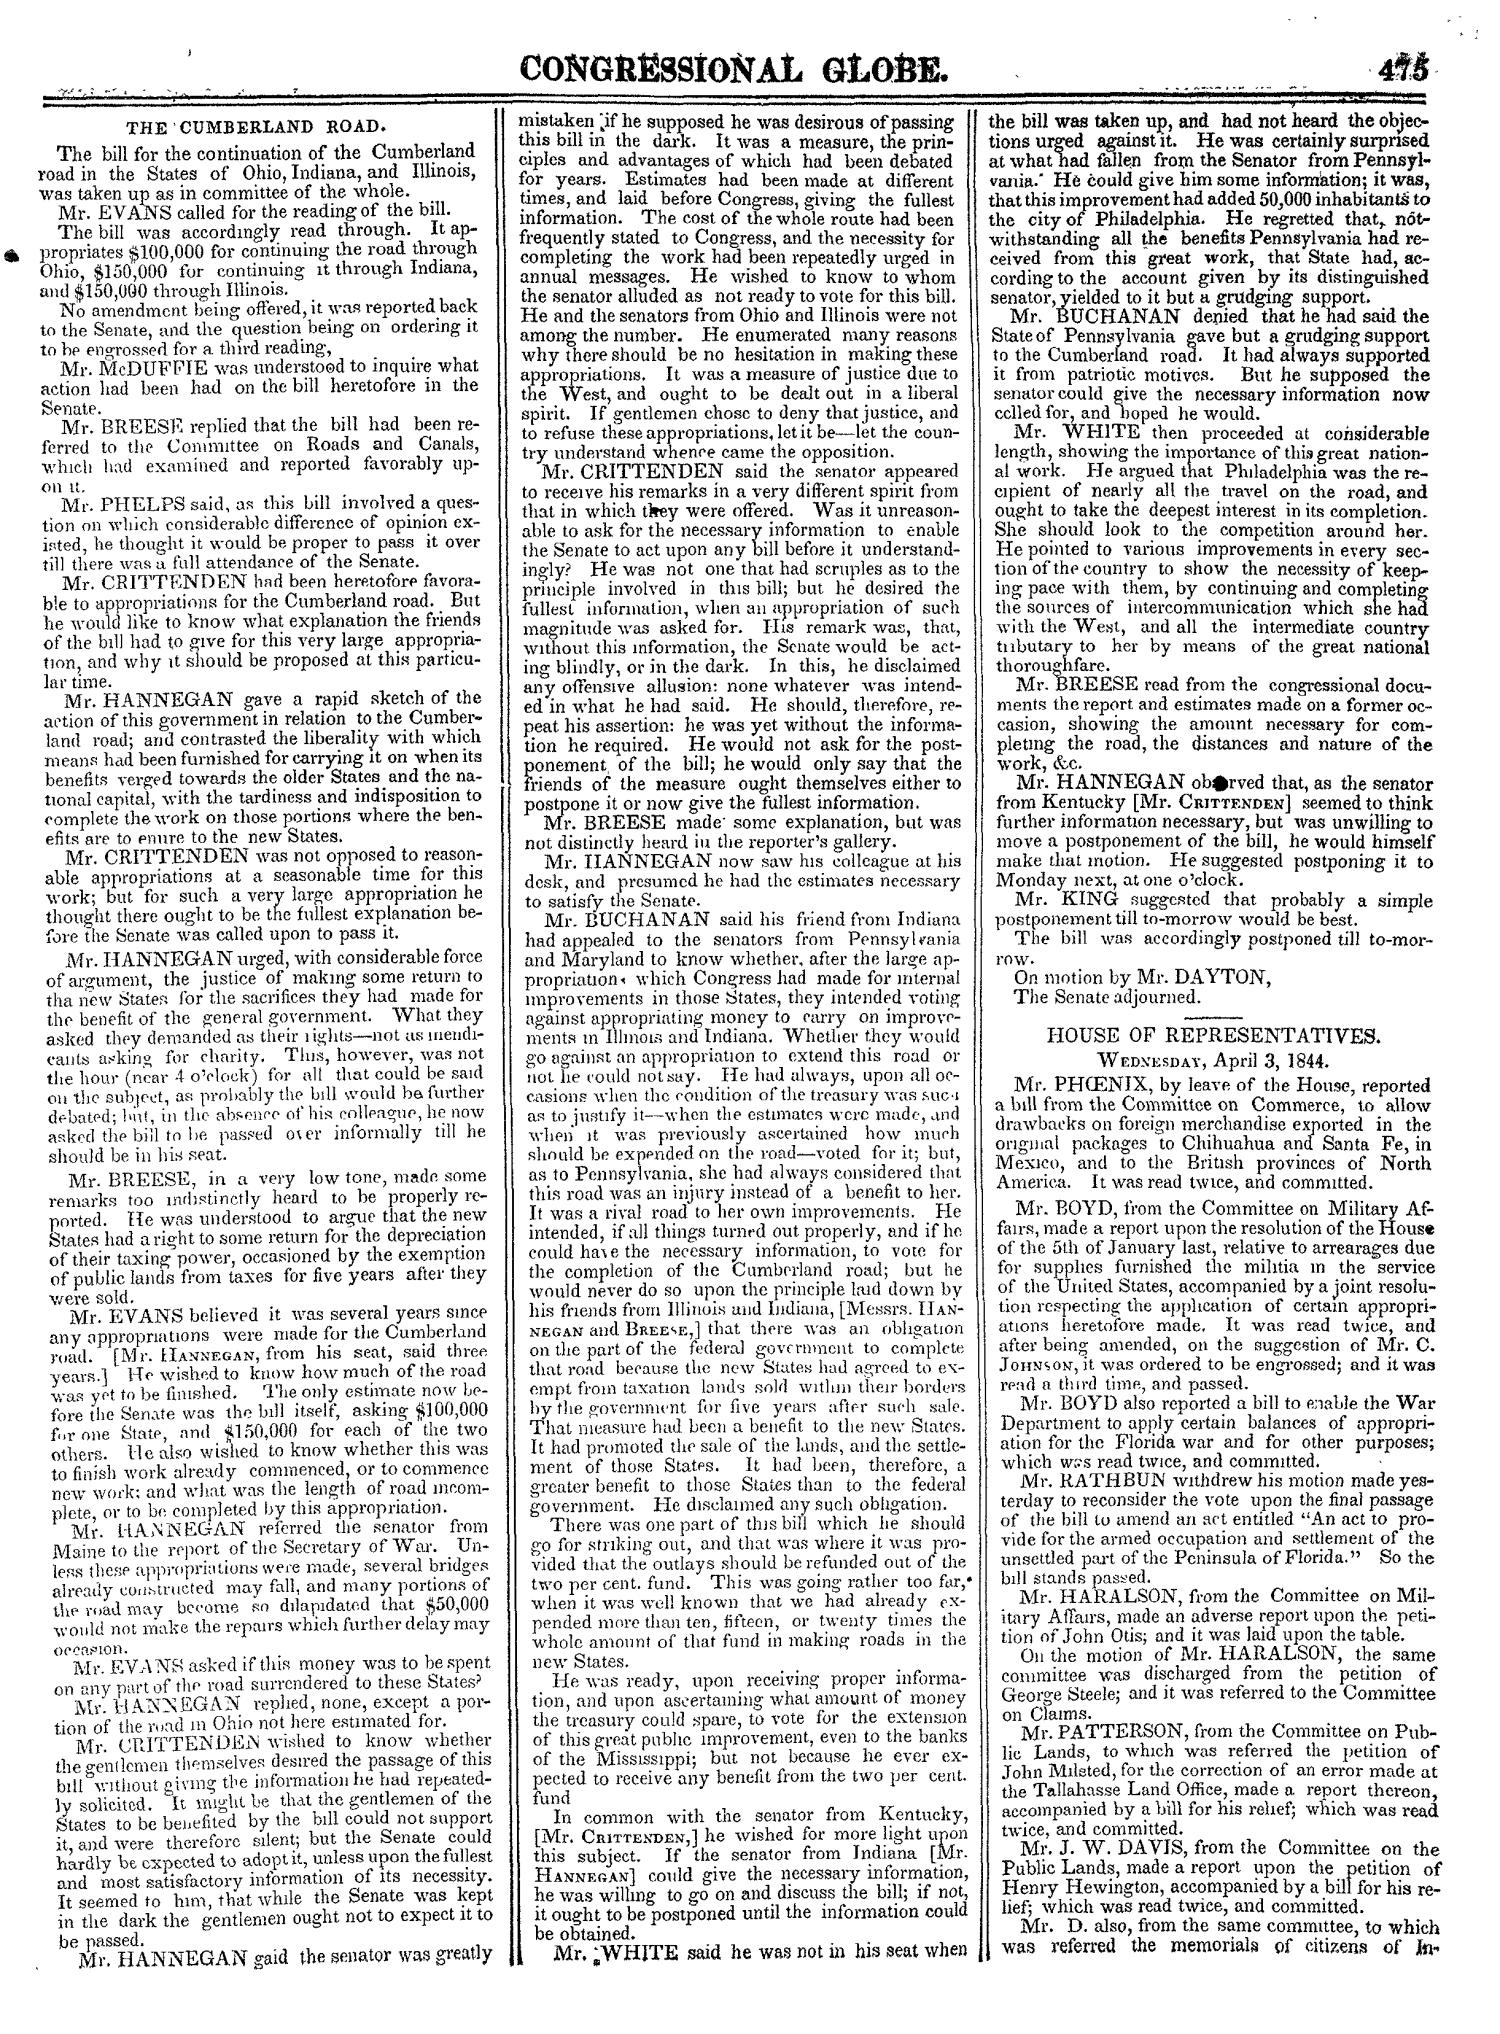 The Congressional Globe, Volume 13, Part 1: Twenty-Eighth Congress, First Session
                                                
                                                    475
                                                